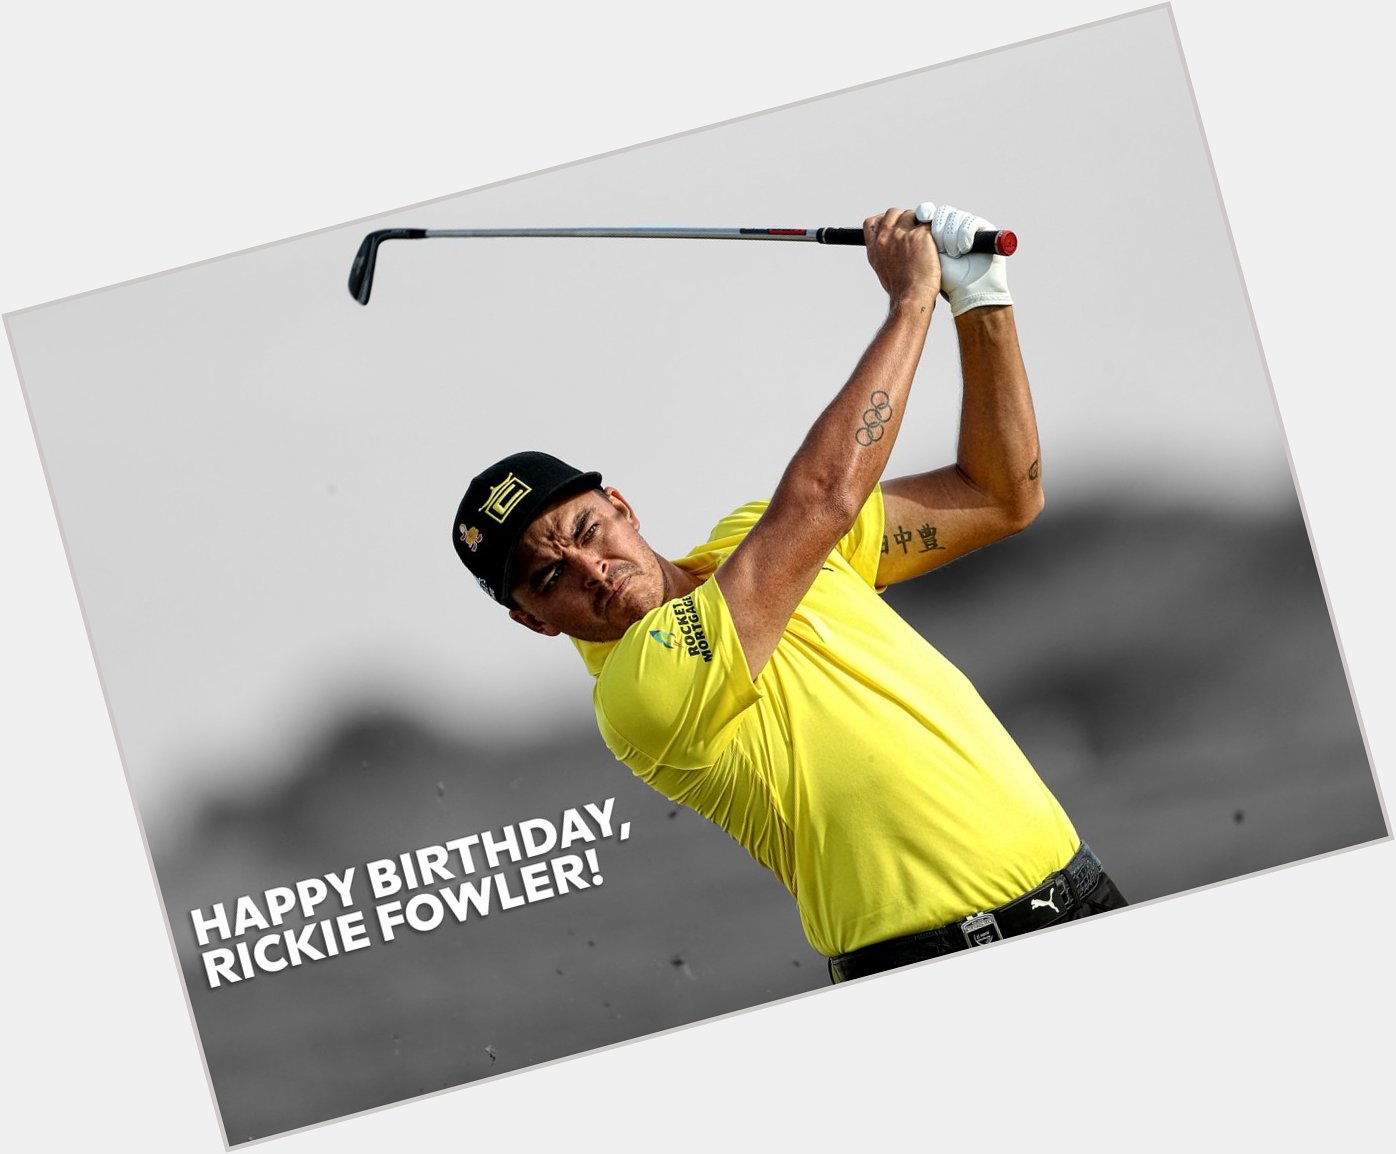 Happy 3 0 th Birthday to Mr. Rickie Fowler! Hope to see you in Detroit this coming June! 